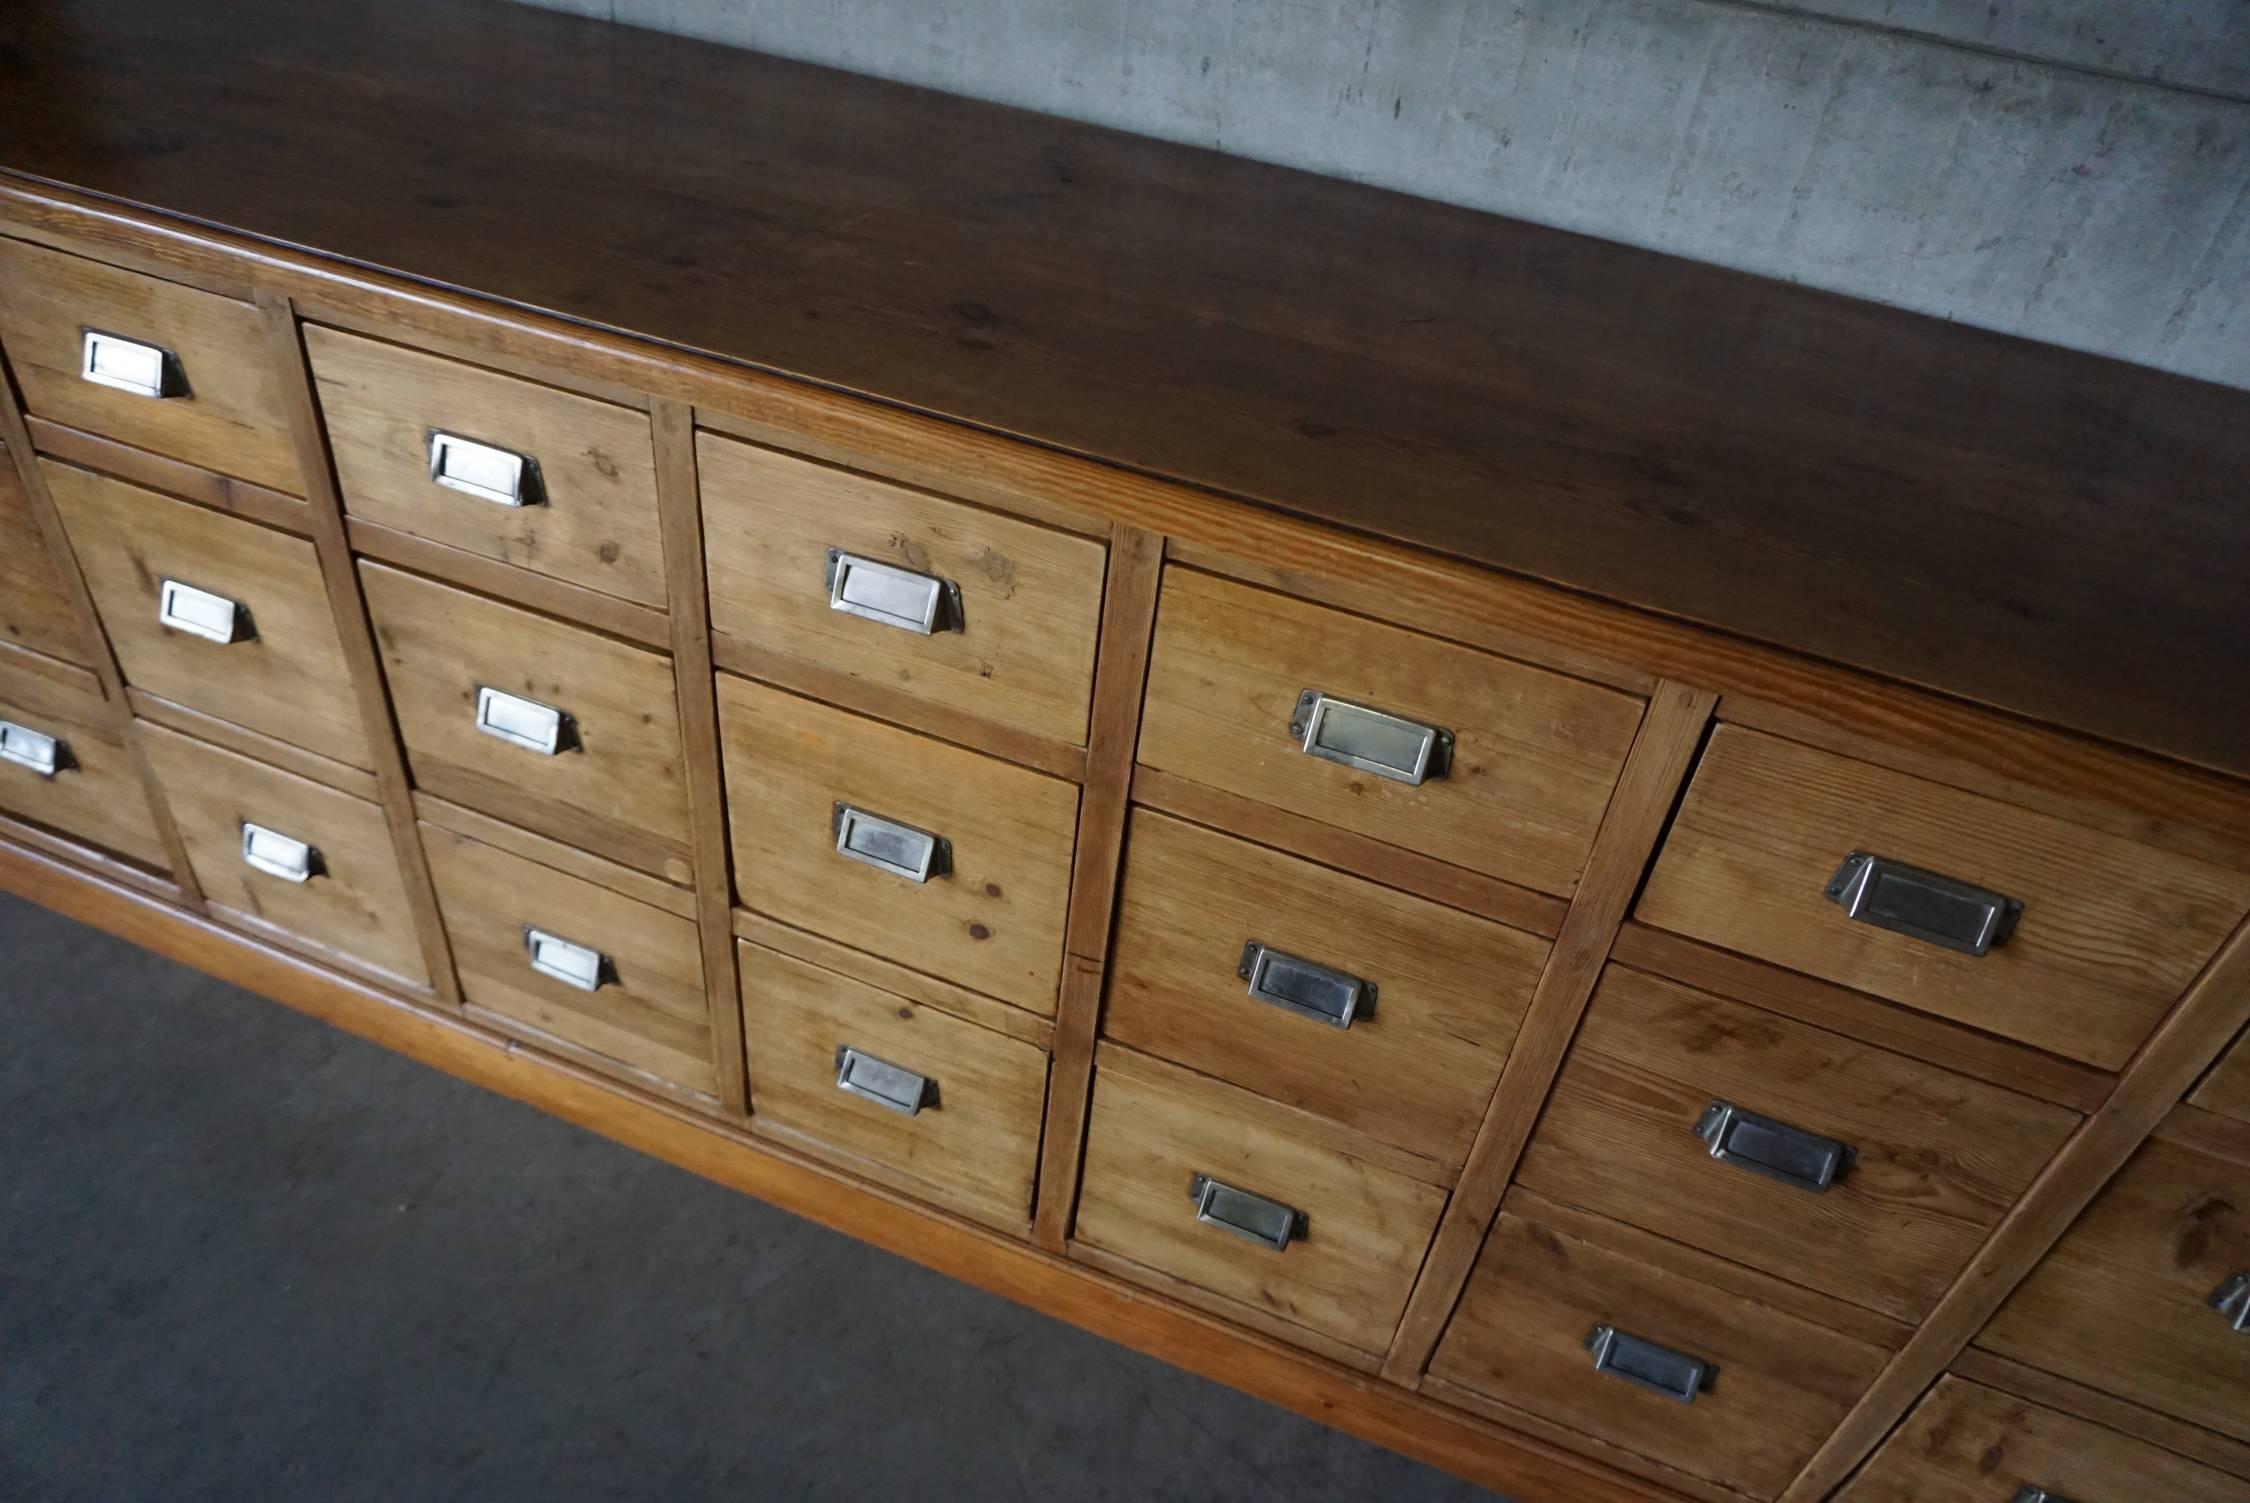 This apothecary bank of drawers was designed and made around the 1950s. The piece is made from pine with cup handles.